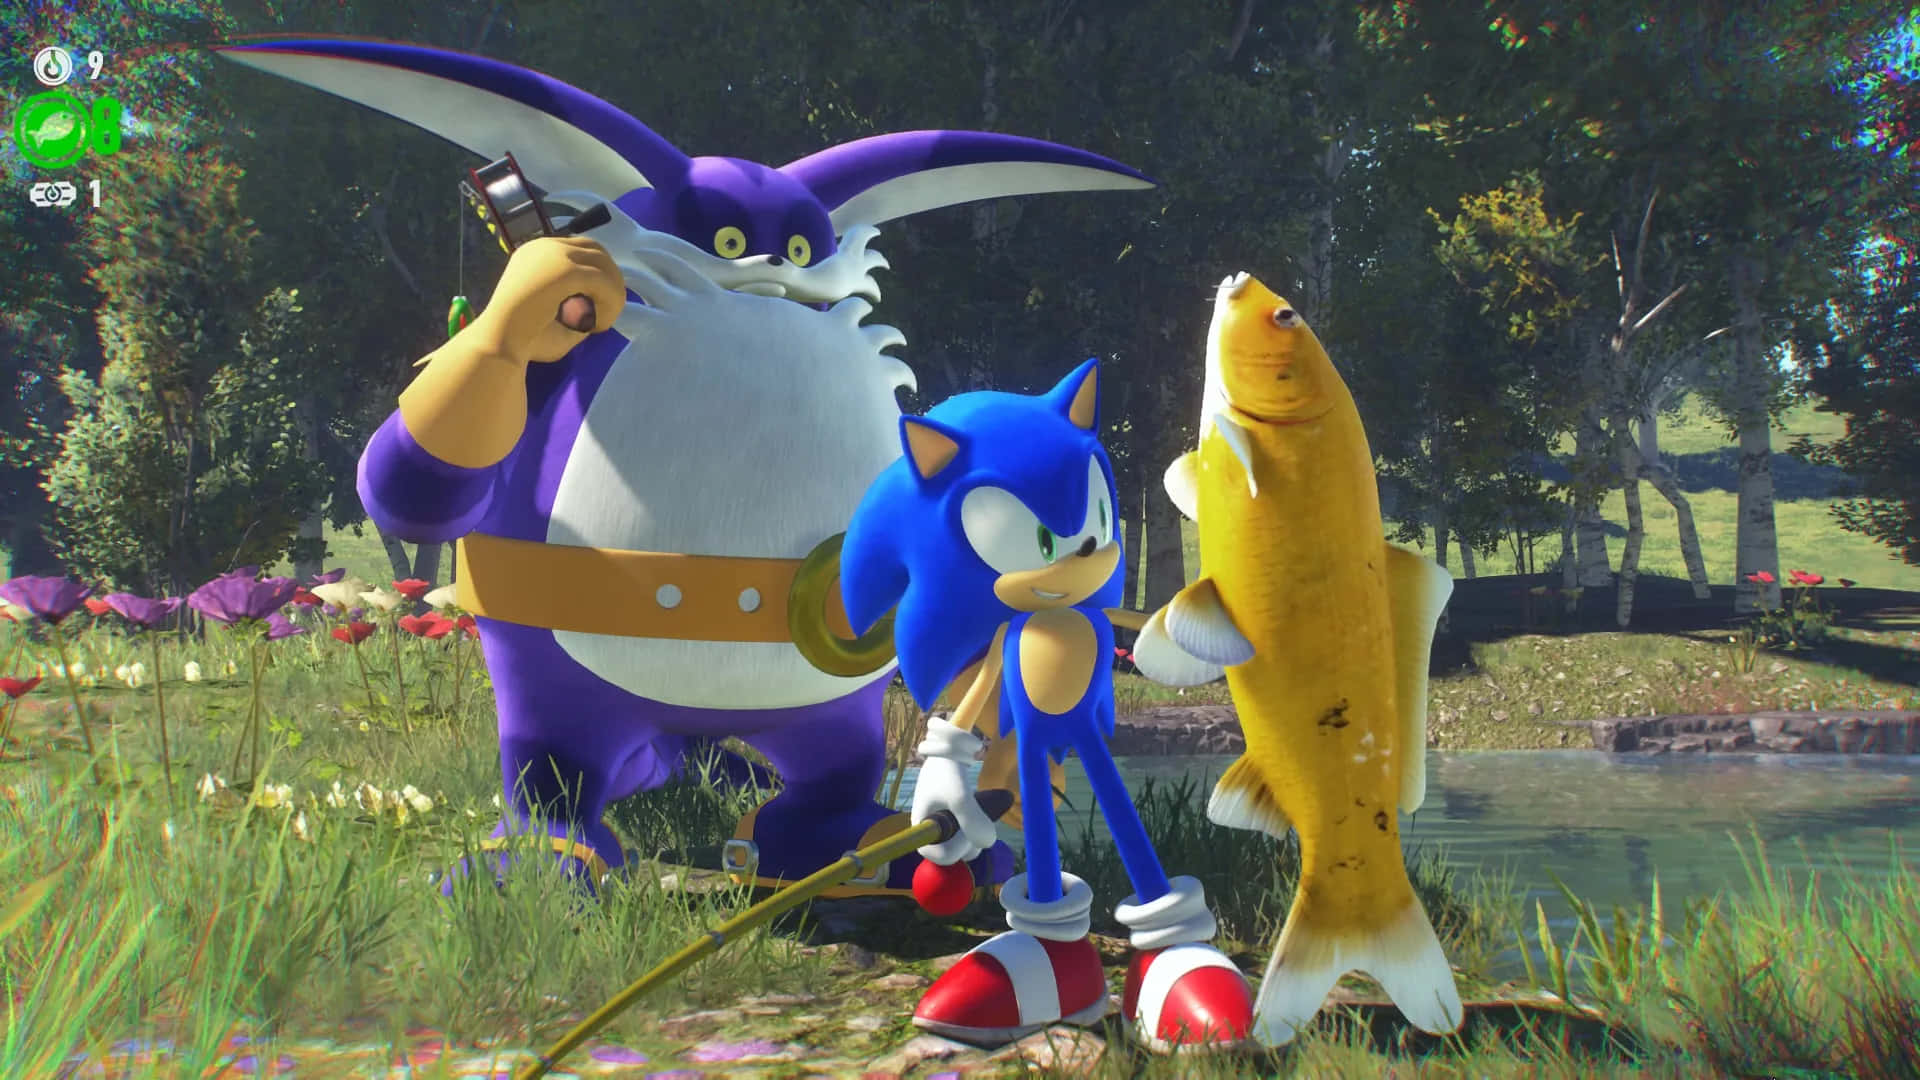 Sonic and Friends in Action Wallpaper